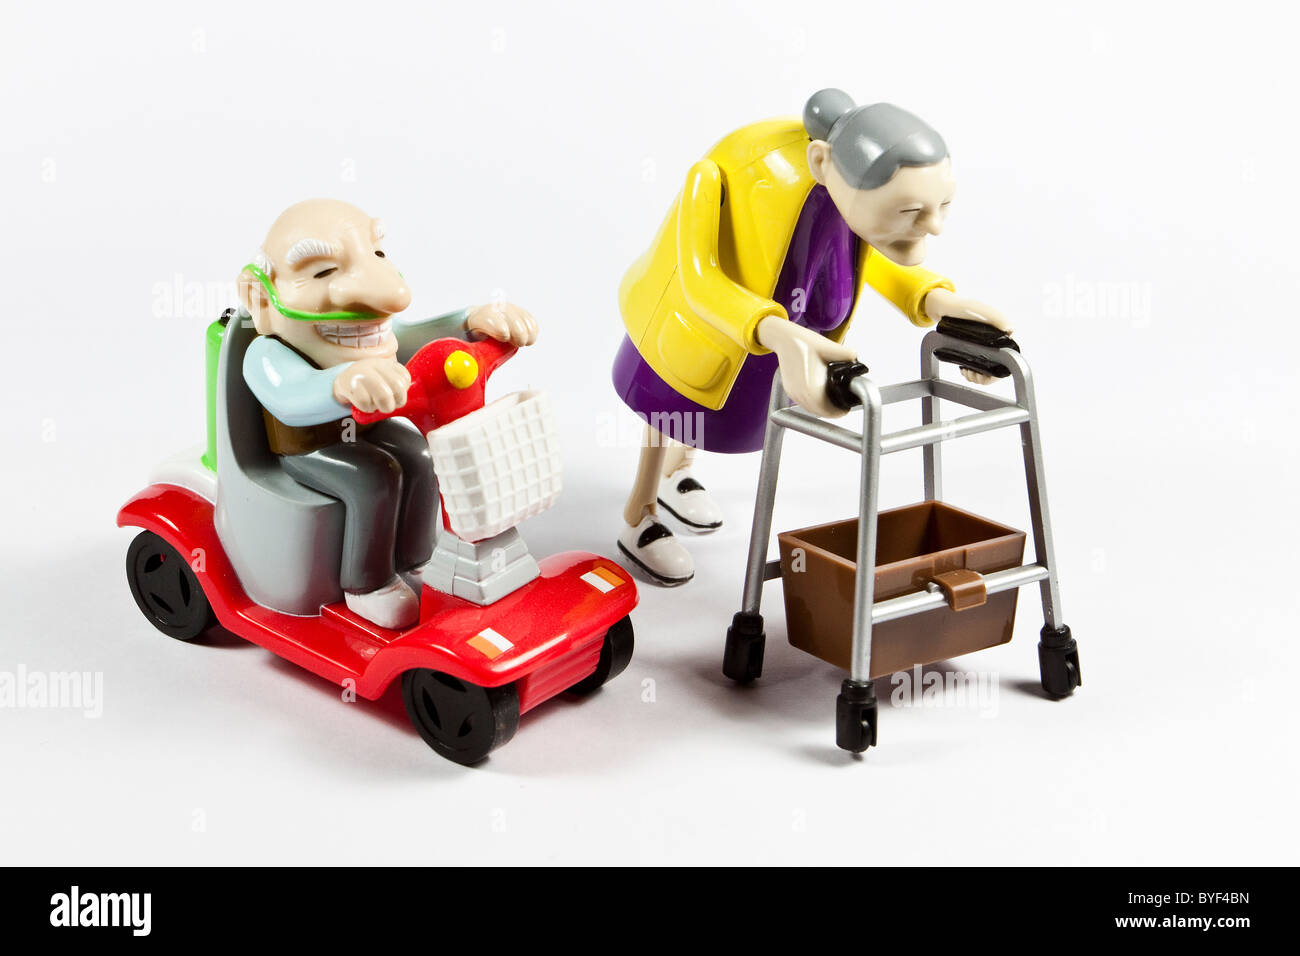 Plastic toys depicting old couple with mobility aids Stock Photo